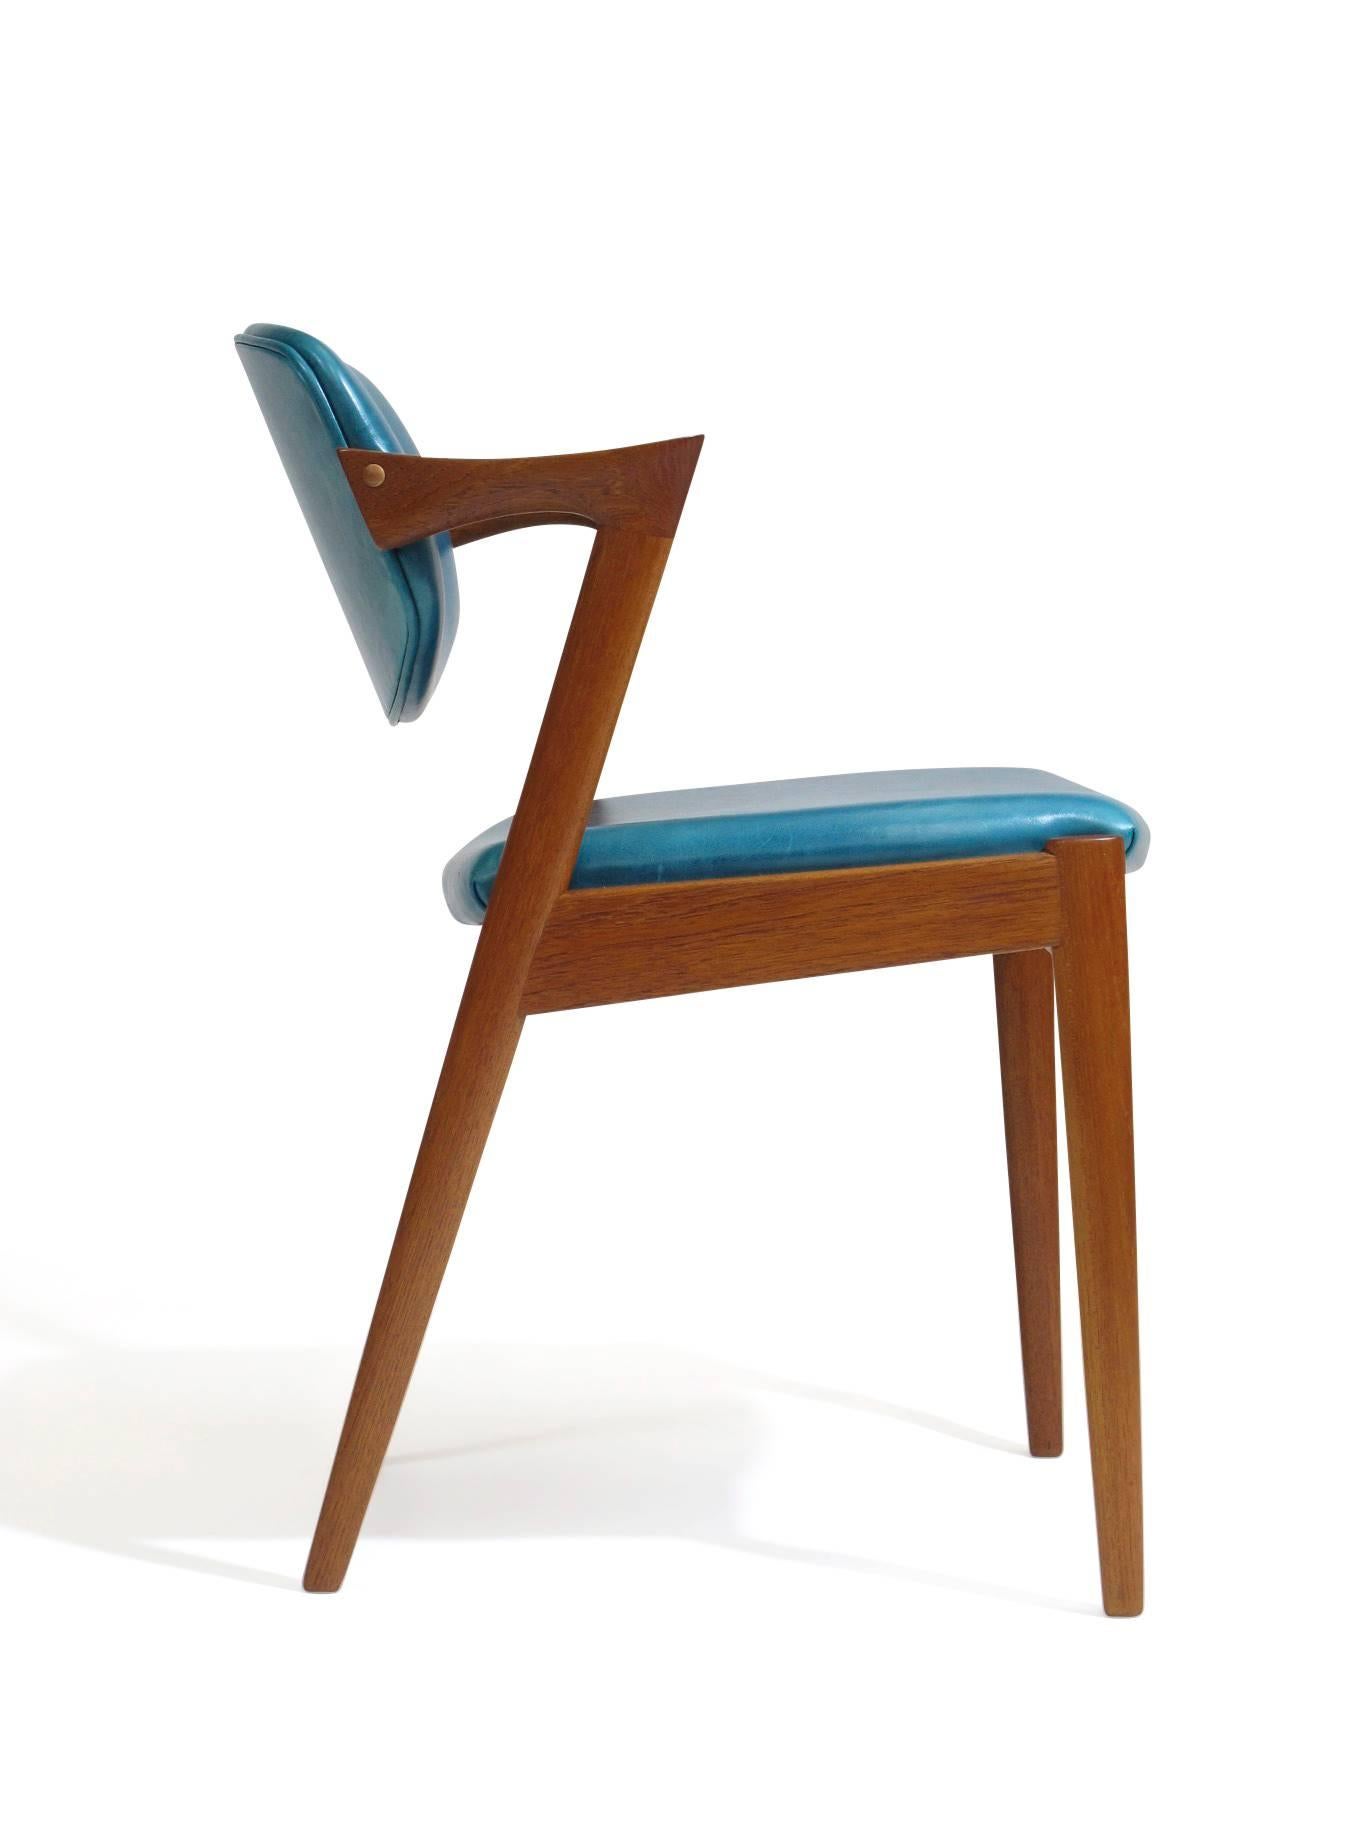 Oiled Six Kai Kristiansen Teak Danish Dining Chairs in Turquoise Leather, 20 Available